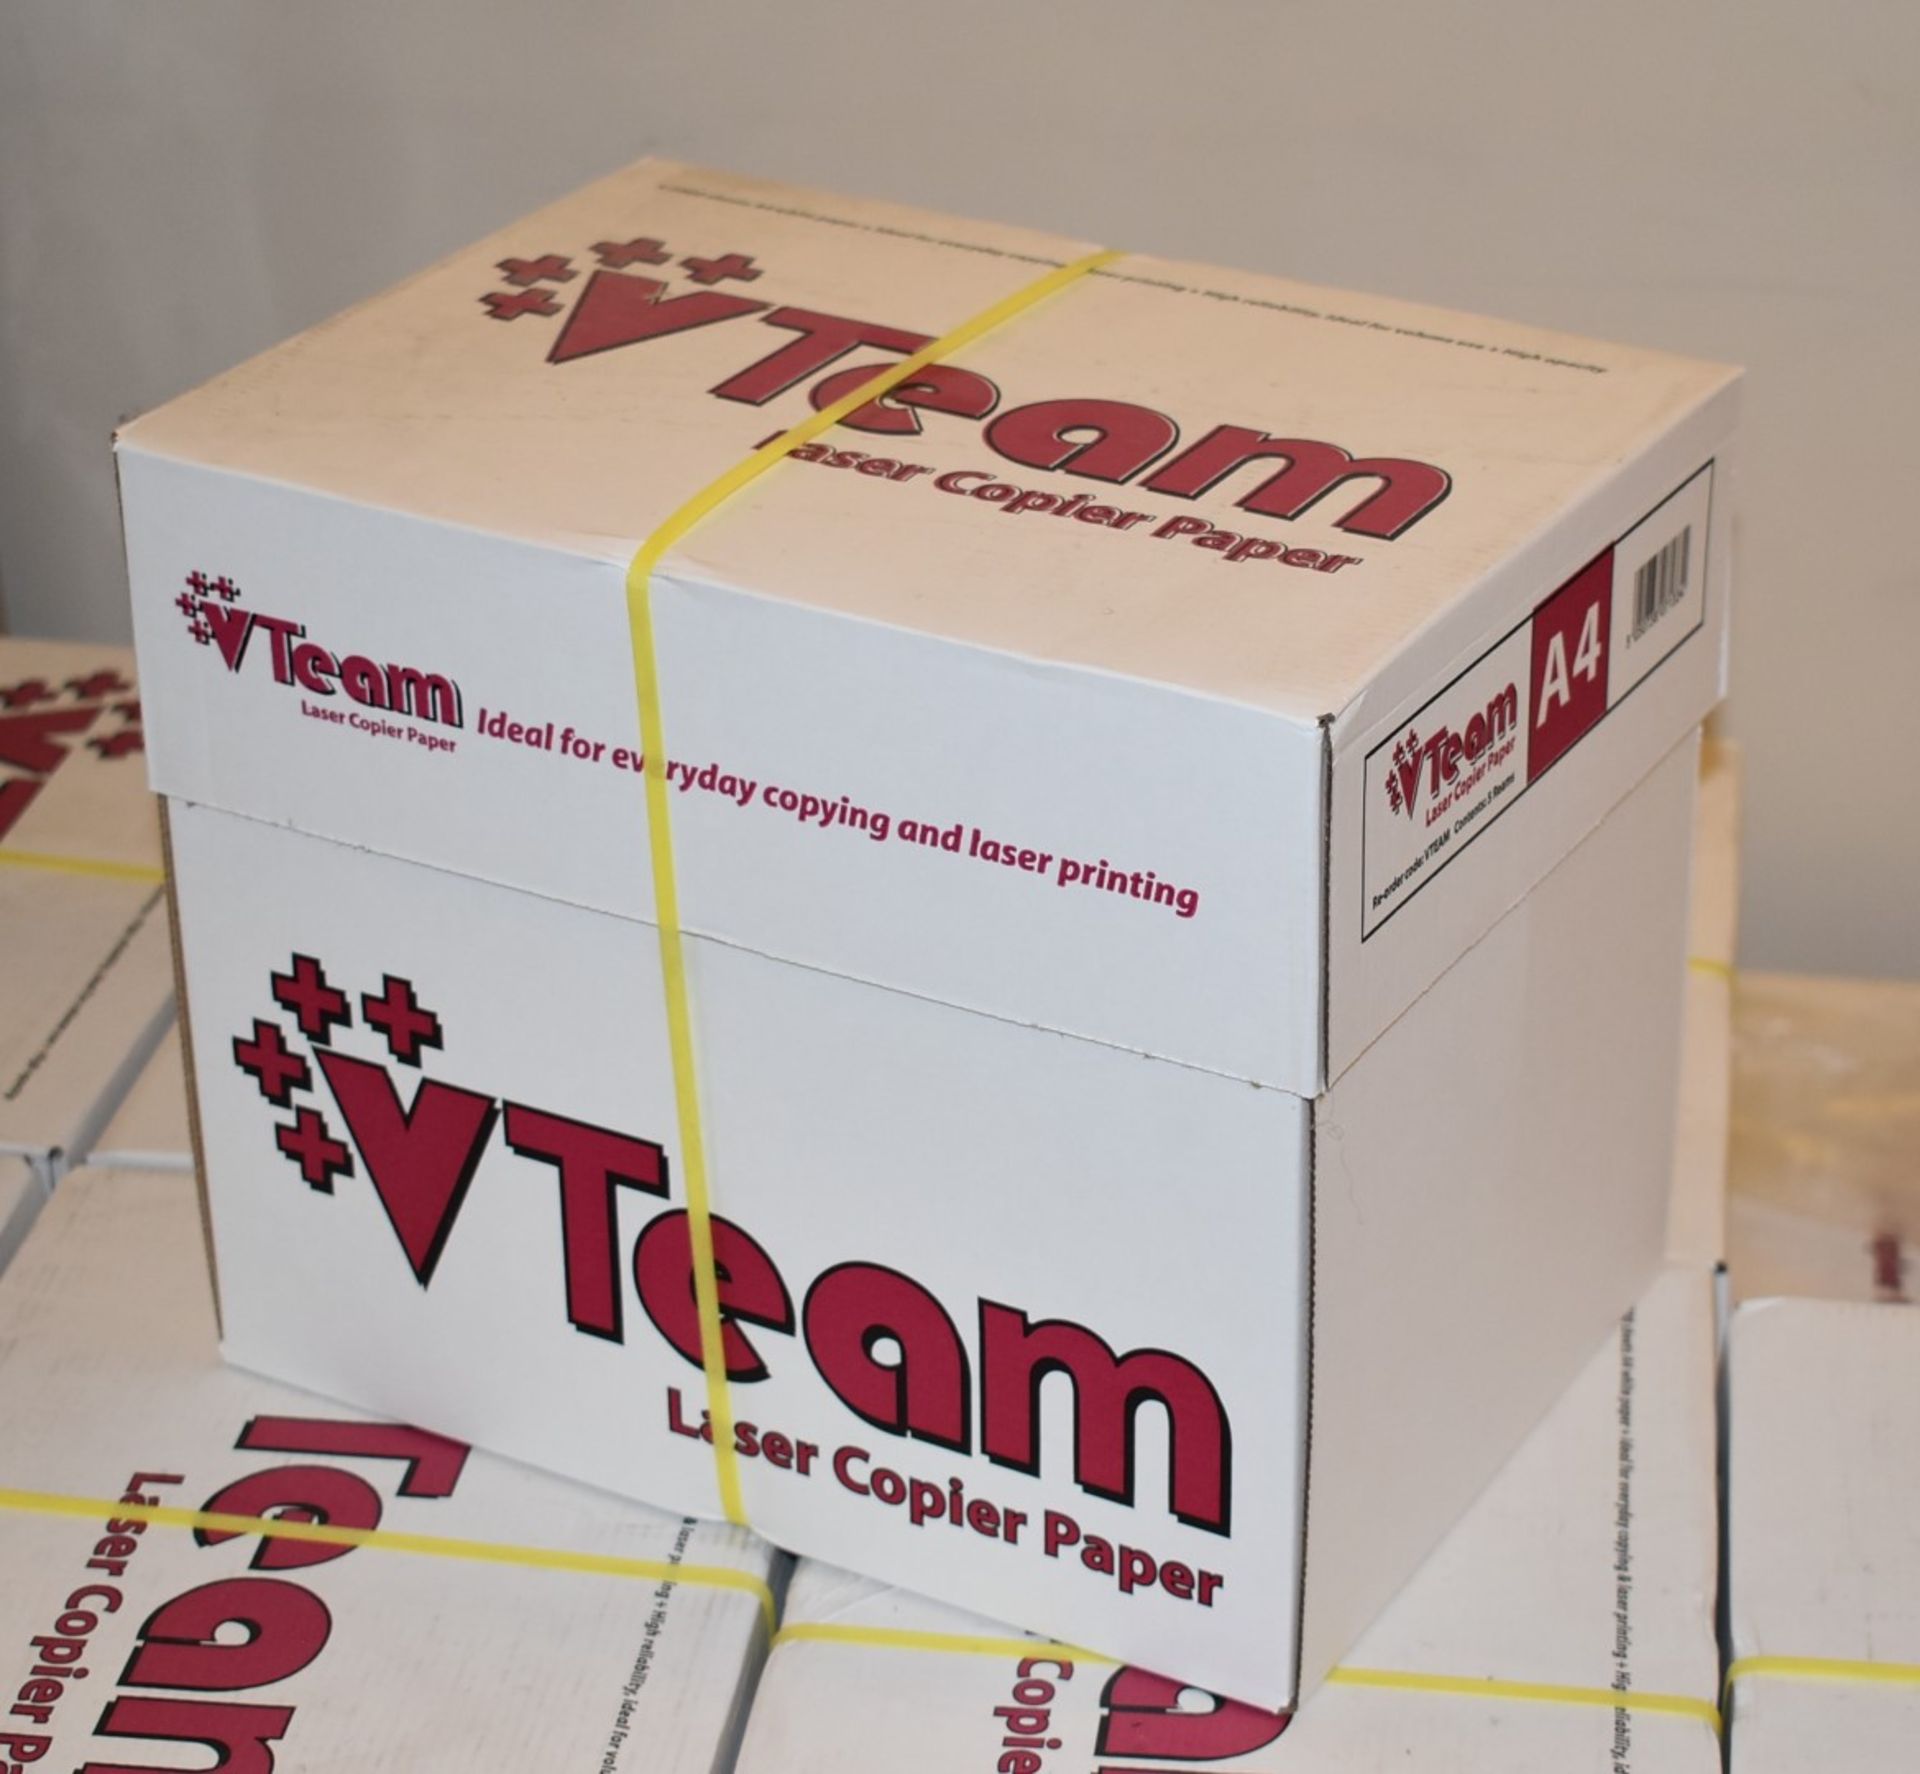 10 x Packs of Vteam A4 Laser Copy Paper - 500 Sheets Per Pack - Includes 2 x Boxes of 5 x Reams - - Image 4 of 6